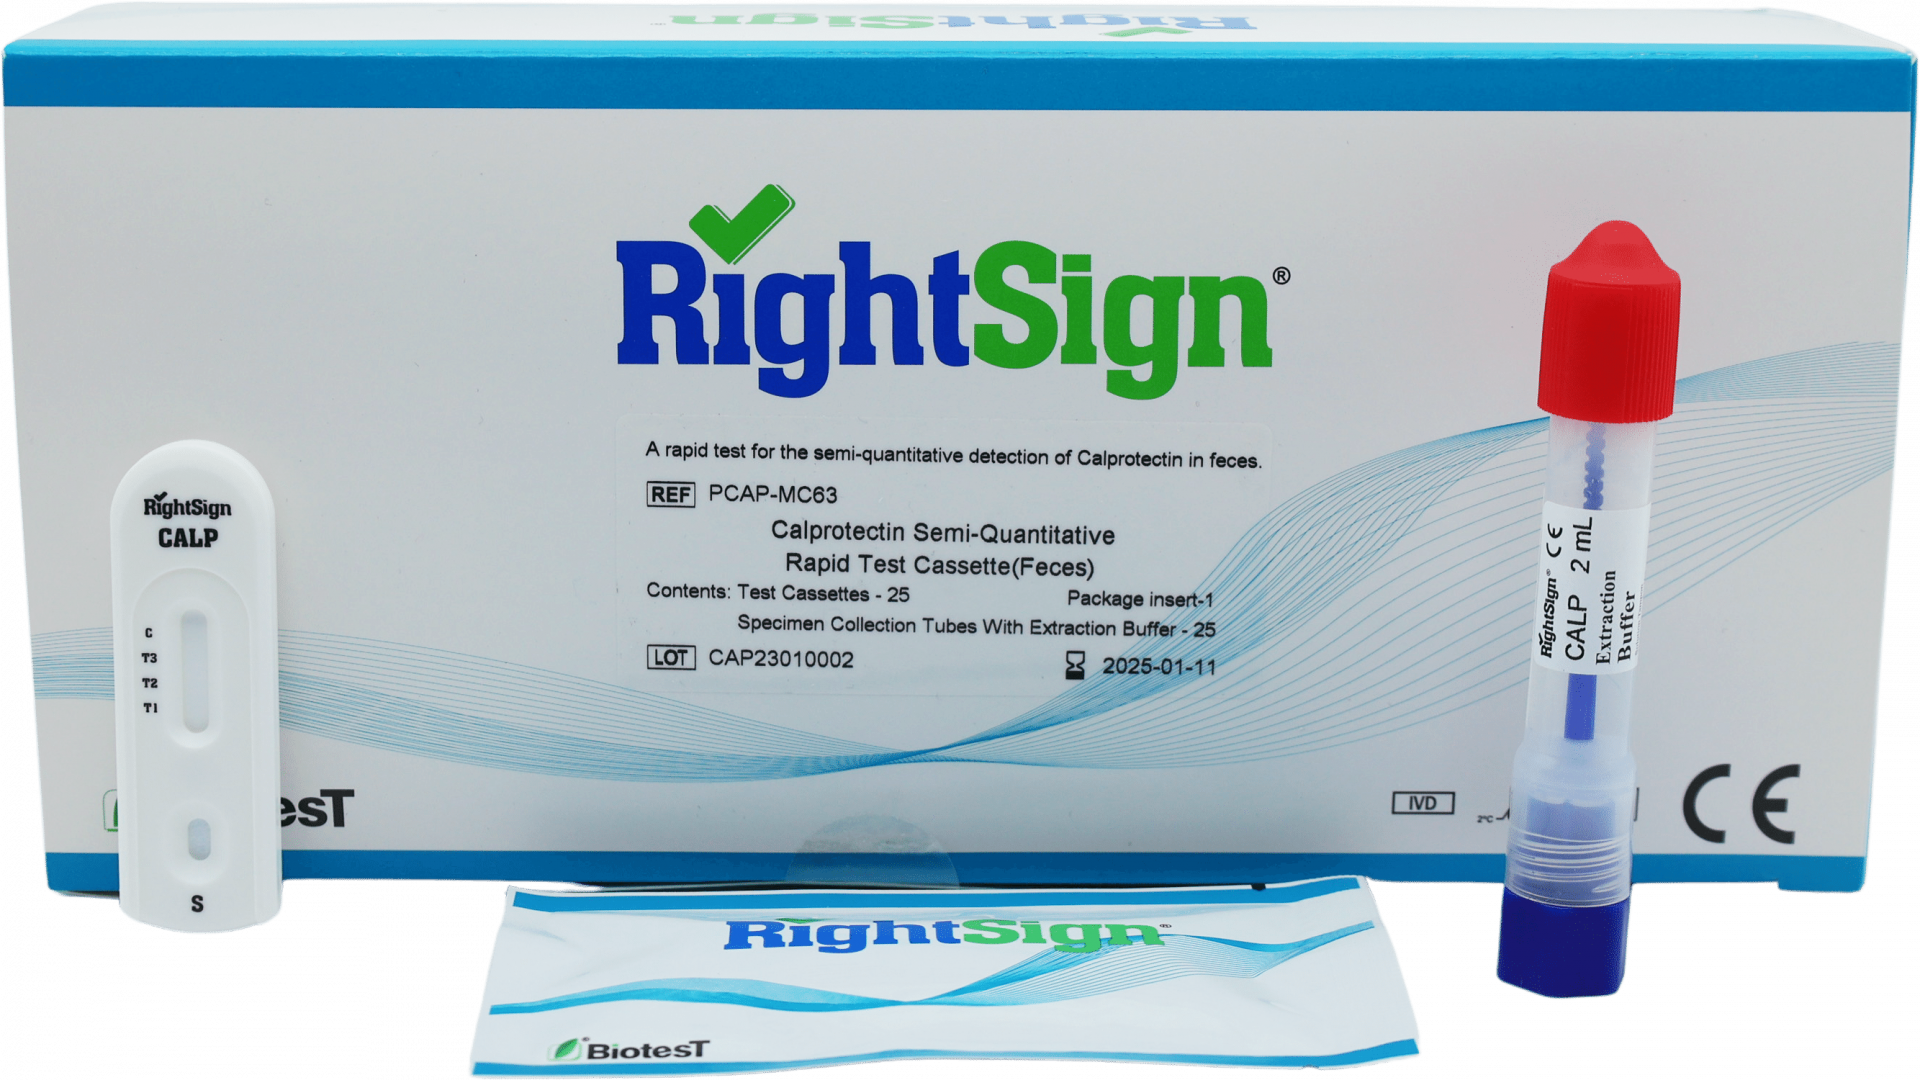 rightsign-calprotectin-rapid-test-cassette